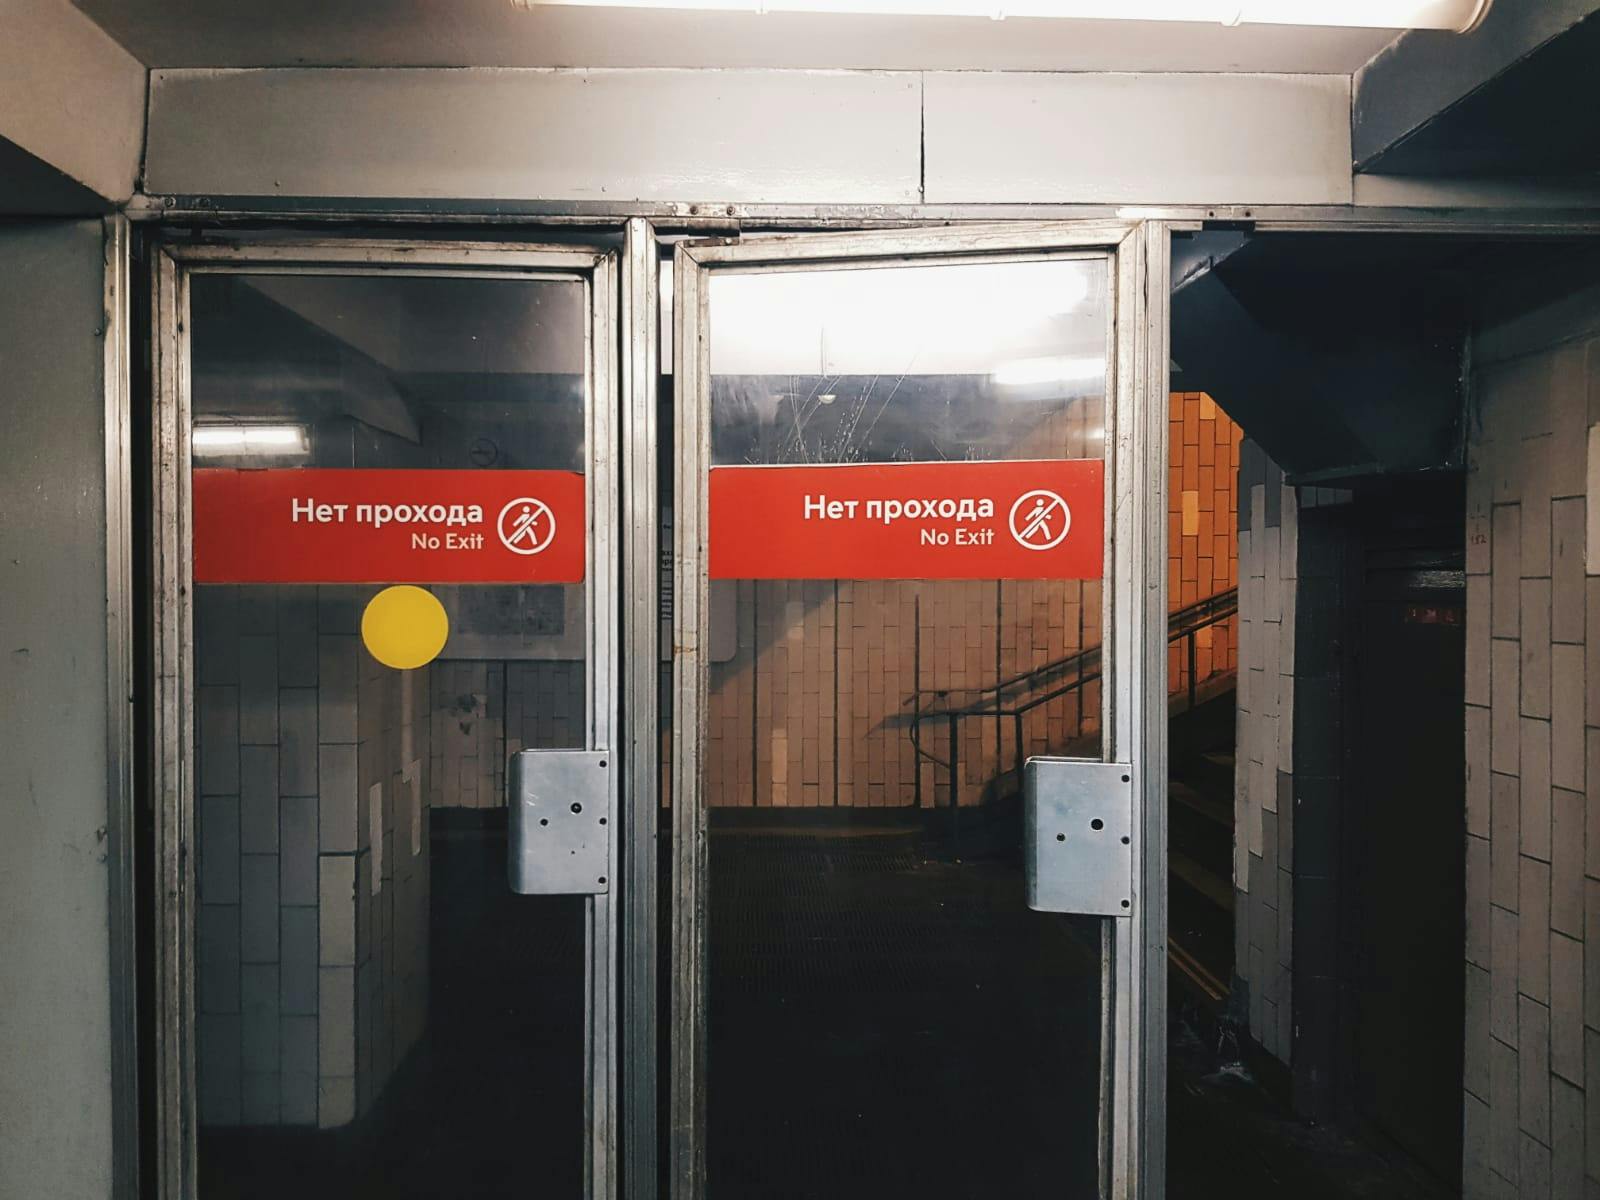 A glass door with a no-entry sign